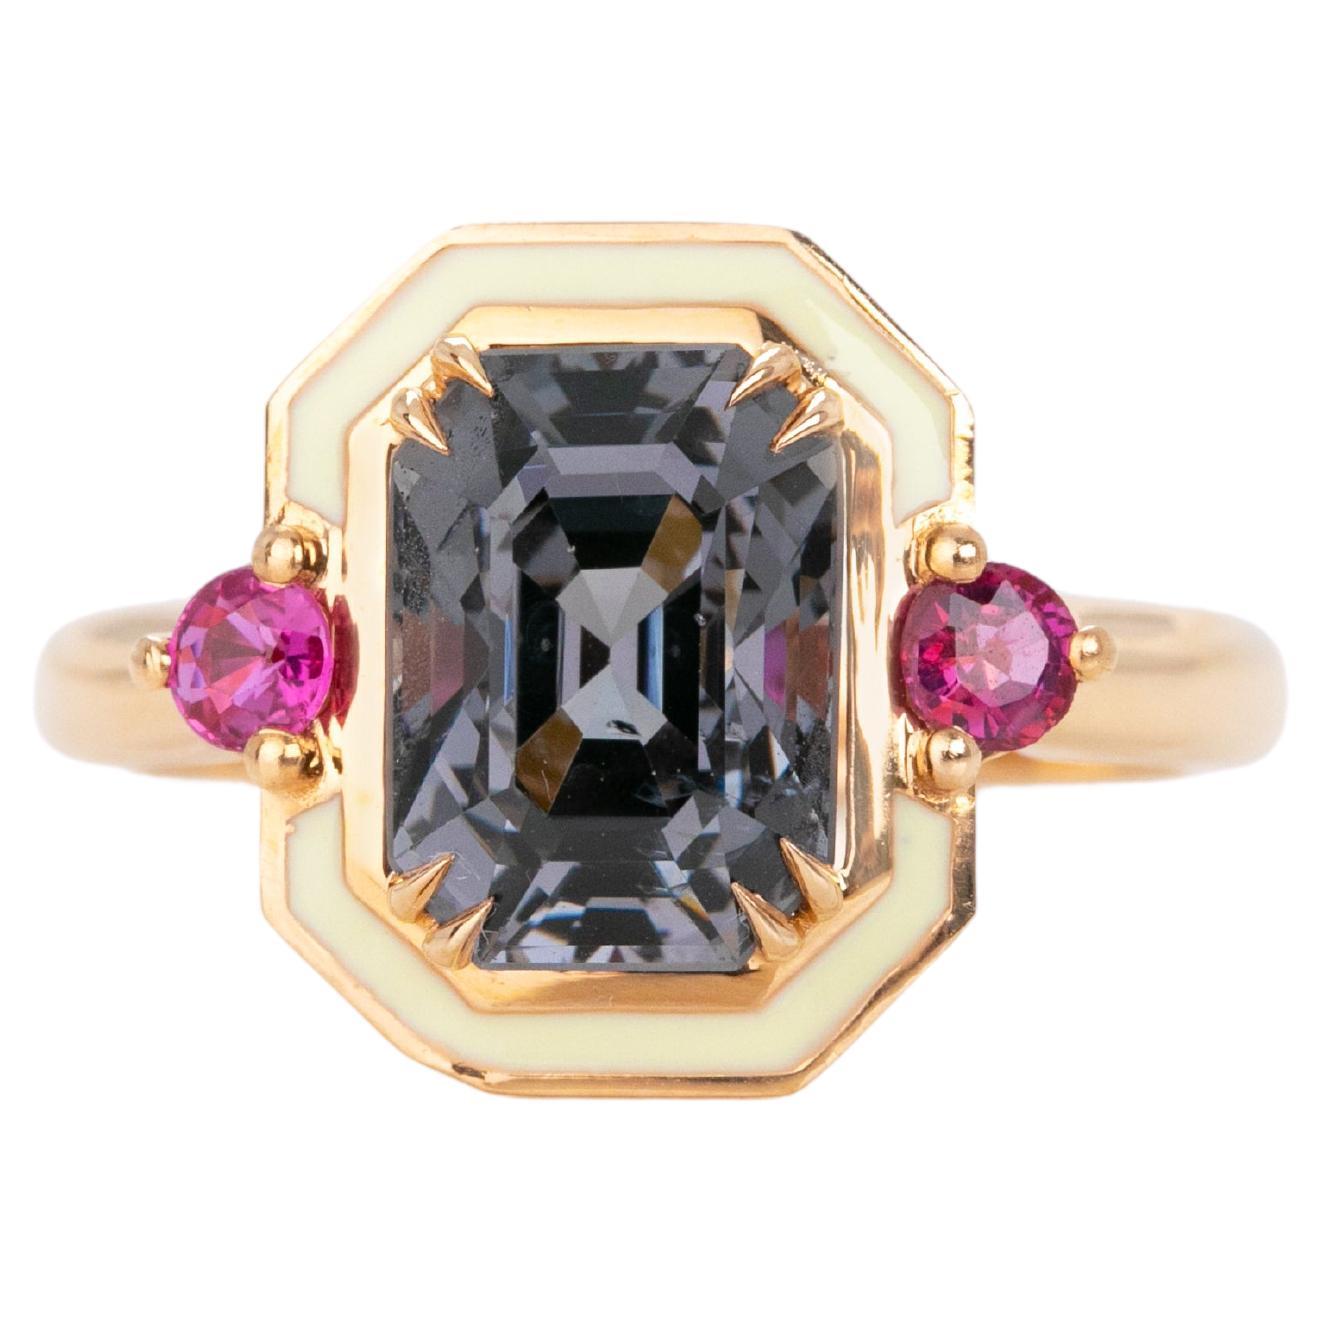 For Sale:  14K Gold 3.65 Ct Radiant Cut Spinal & Ruby Enameled Cocktail Ring